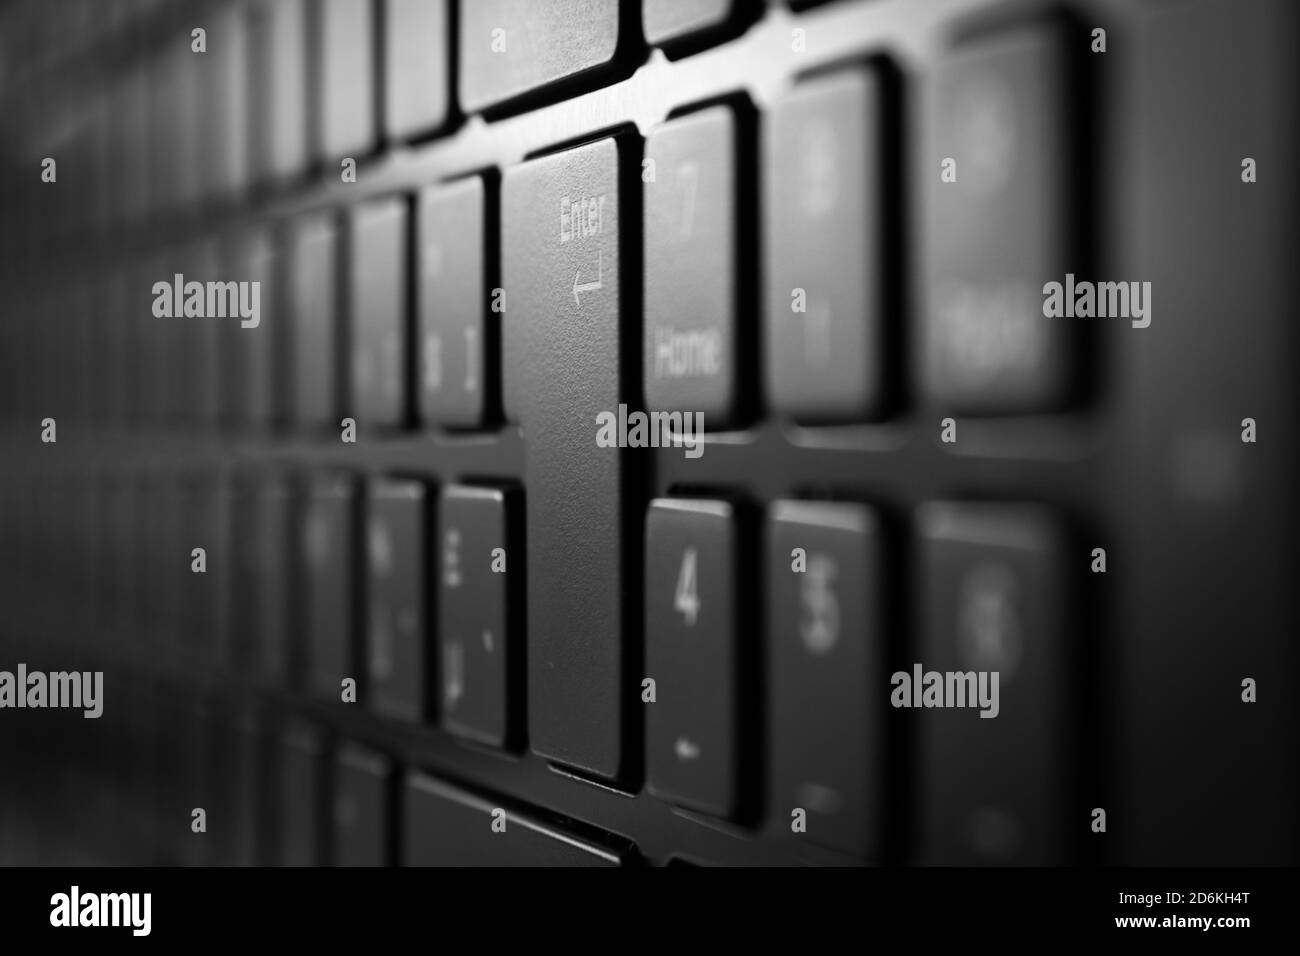 Vertical view of laptop keyboard with selective focus and soft background blur Stock Photo